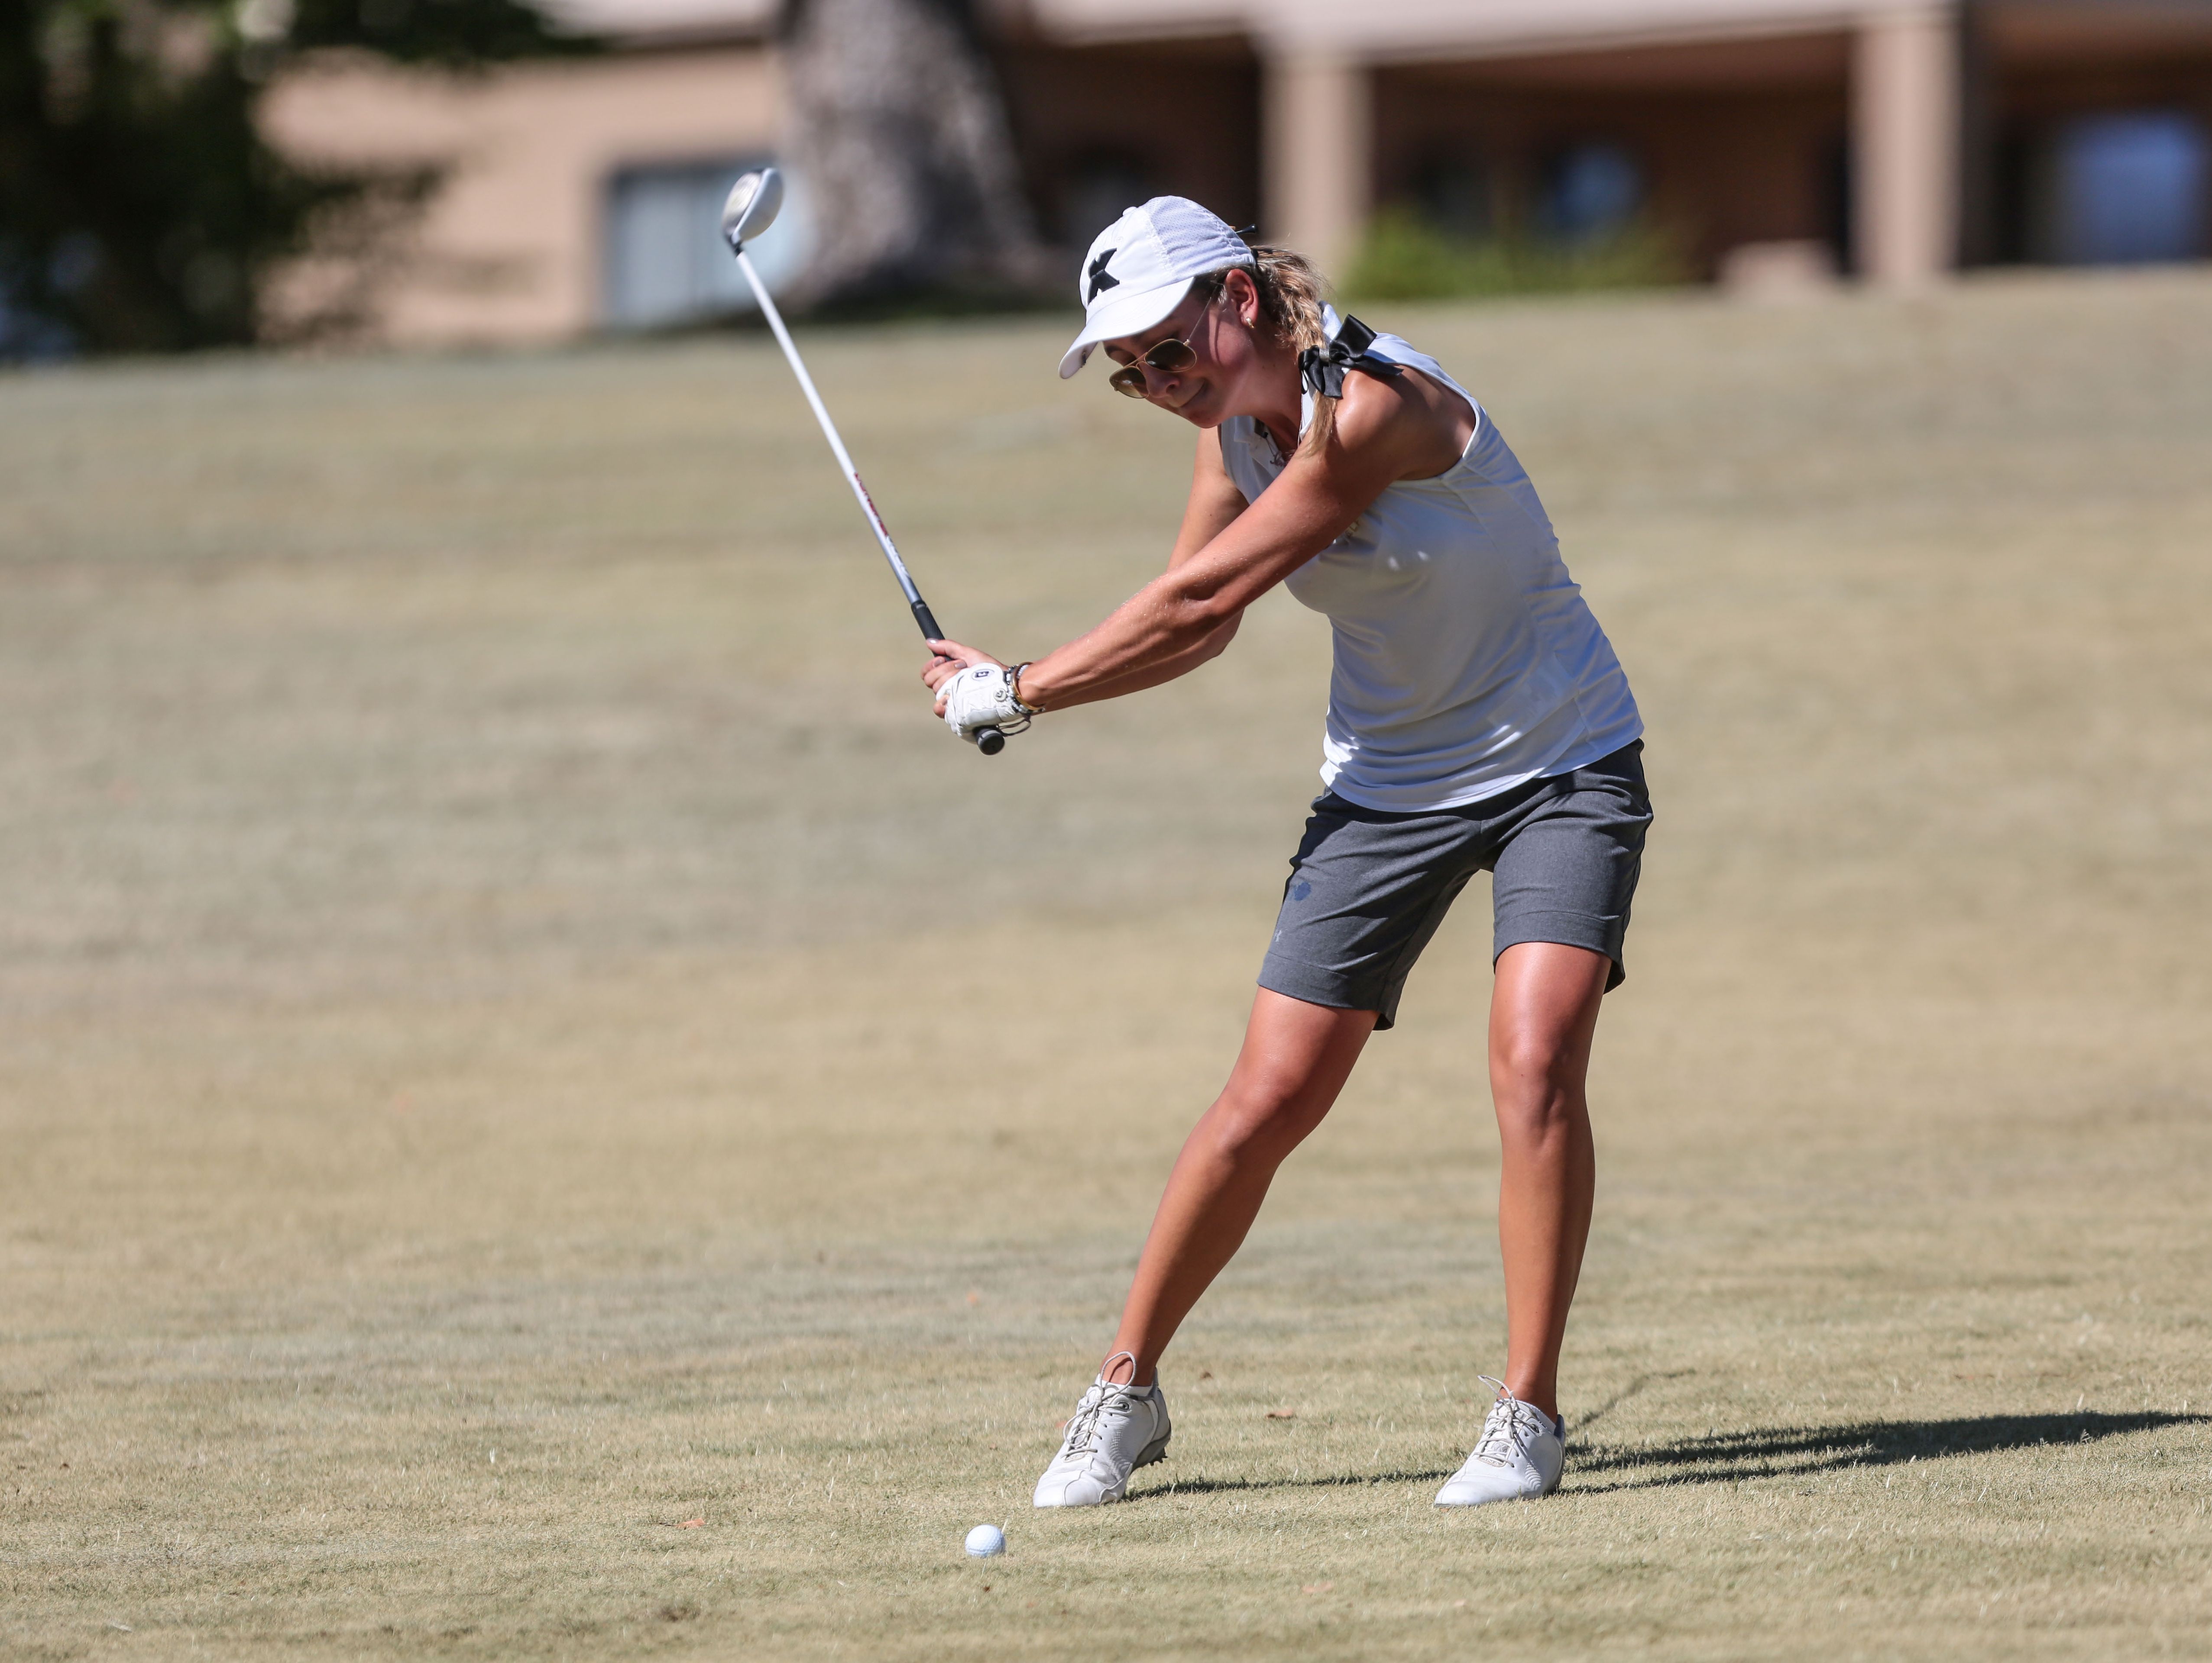 Xavier Prep's Vera Markevich on the 10th hole during the Desert Valley League girls' golf individual finals on Thursday, October 20, 2016 at the JW Marriott Desert Springs Resort in Palm Desert.